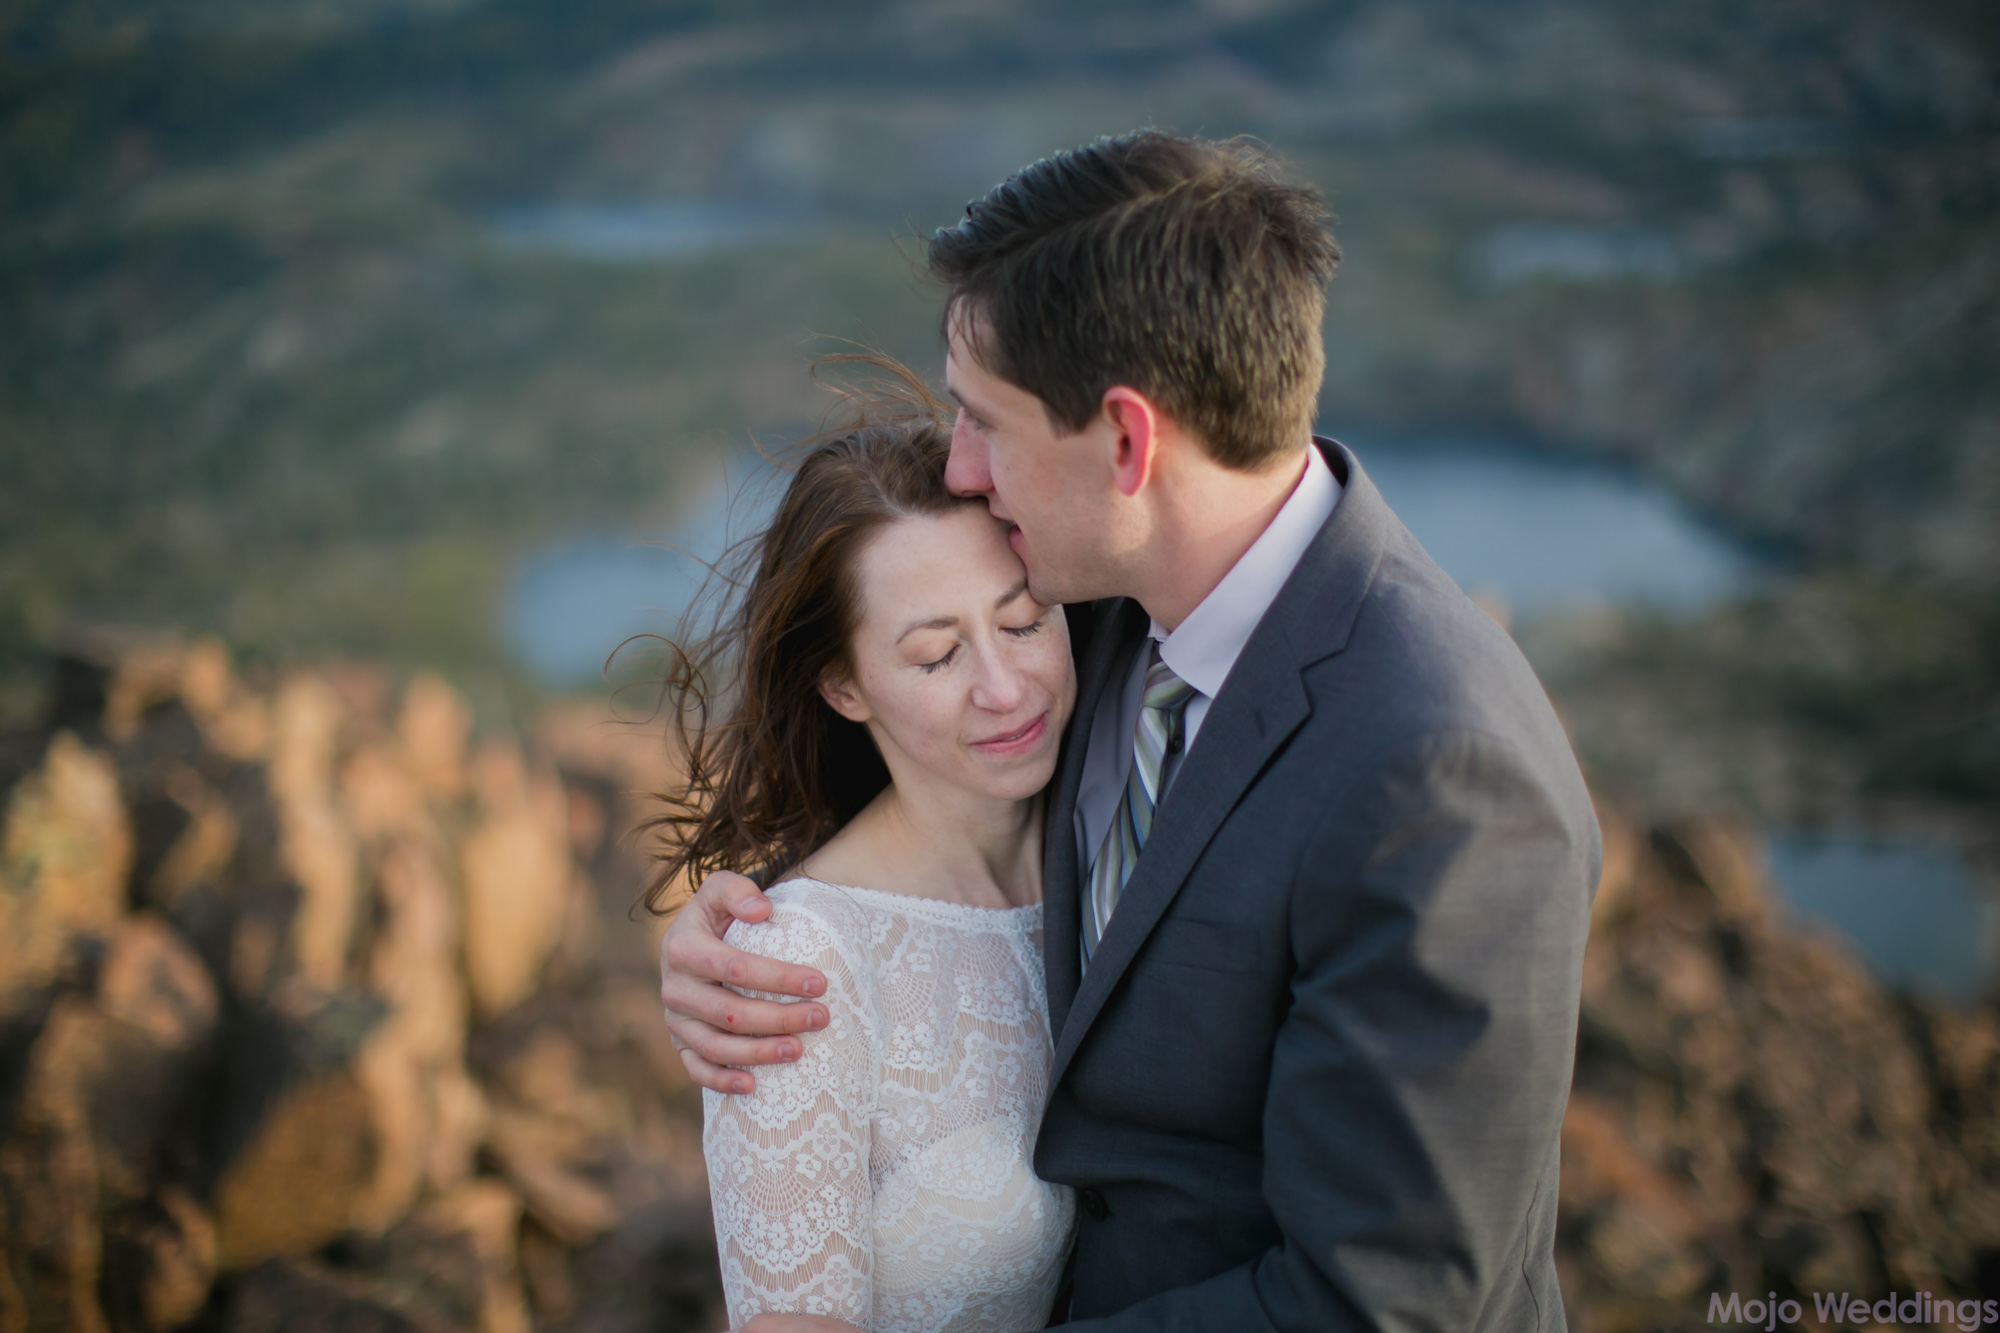 He kisses her forehead with a blurred out background of mountaintop and lakes.